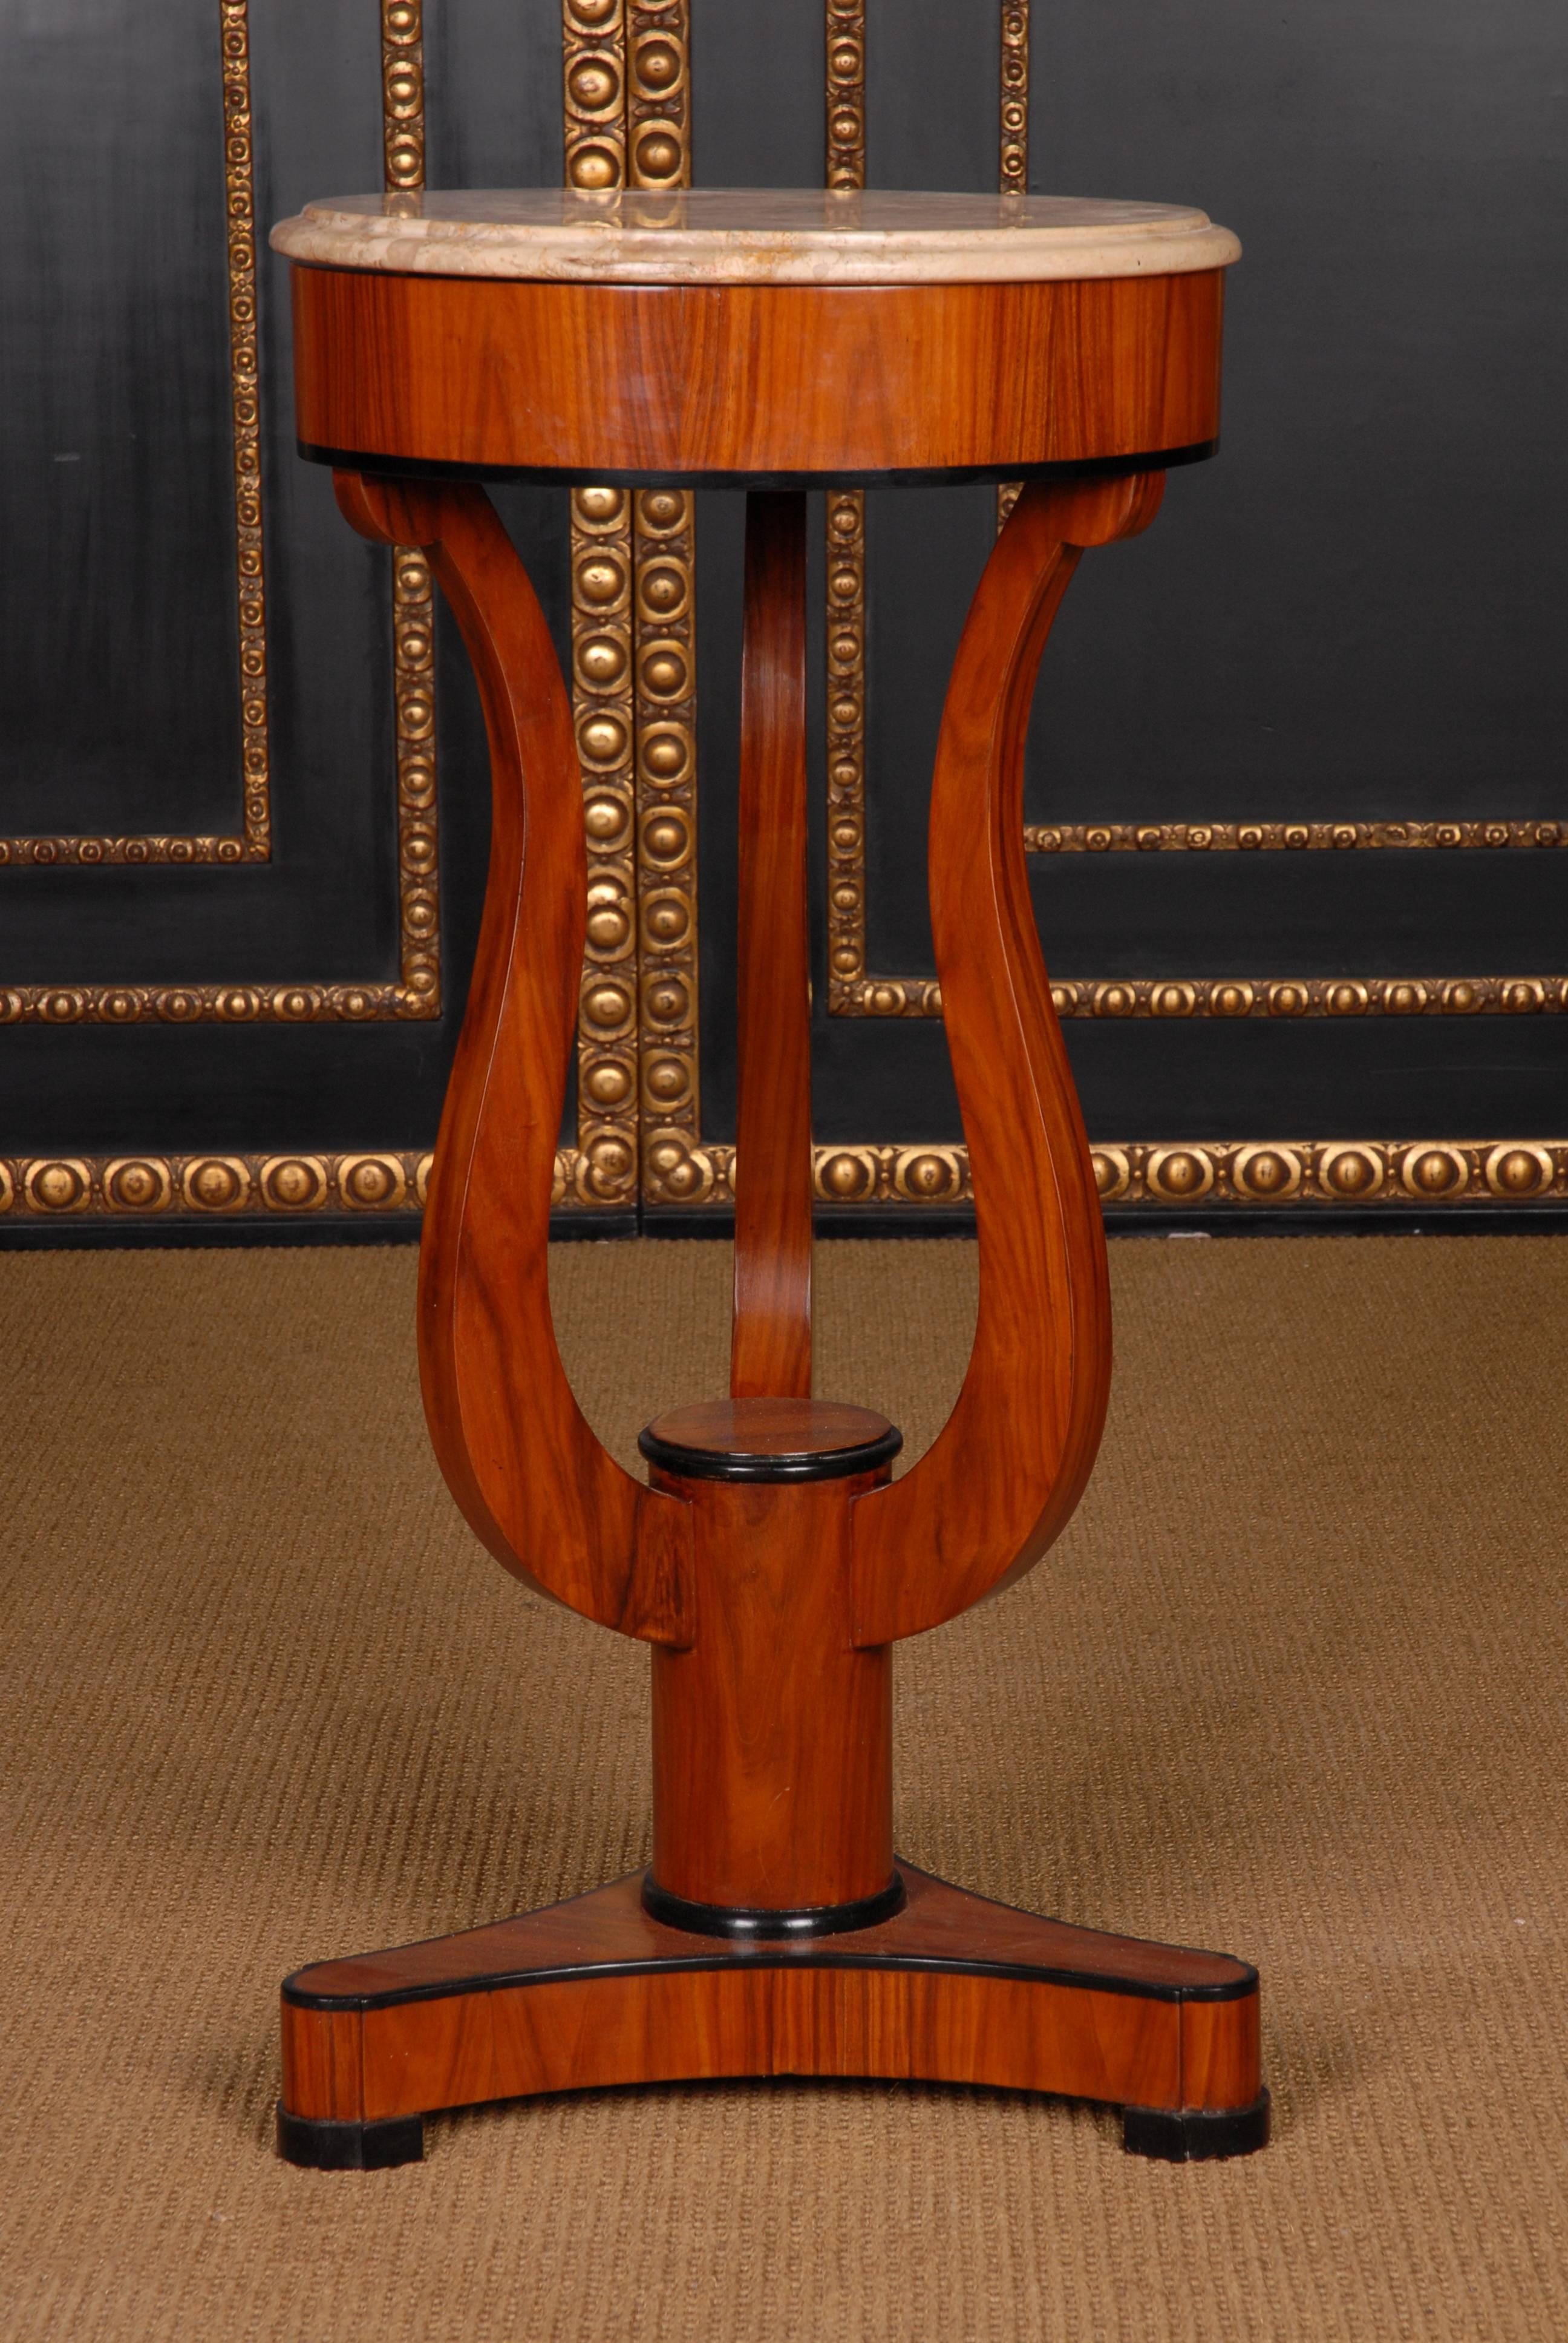 Mahogany on solid wood and partly boned. Round sheet with black-and-white solid marble slab, oversized frame and lyre-shaped curly legs on three-sided base plate and disc feet. This form corresponds to the Viennese Biedermeier and is extremely rare.